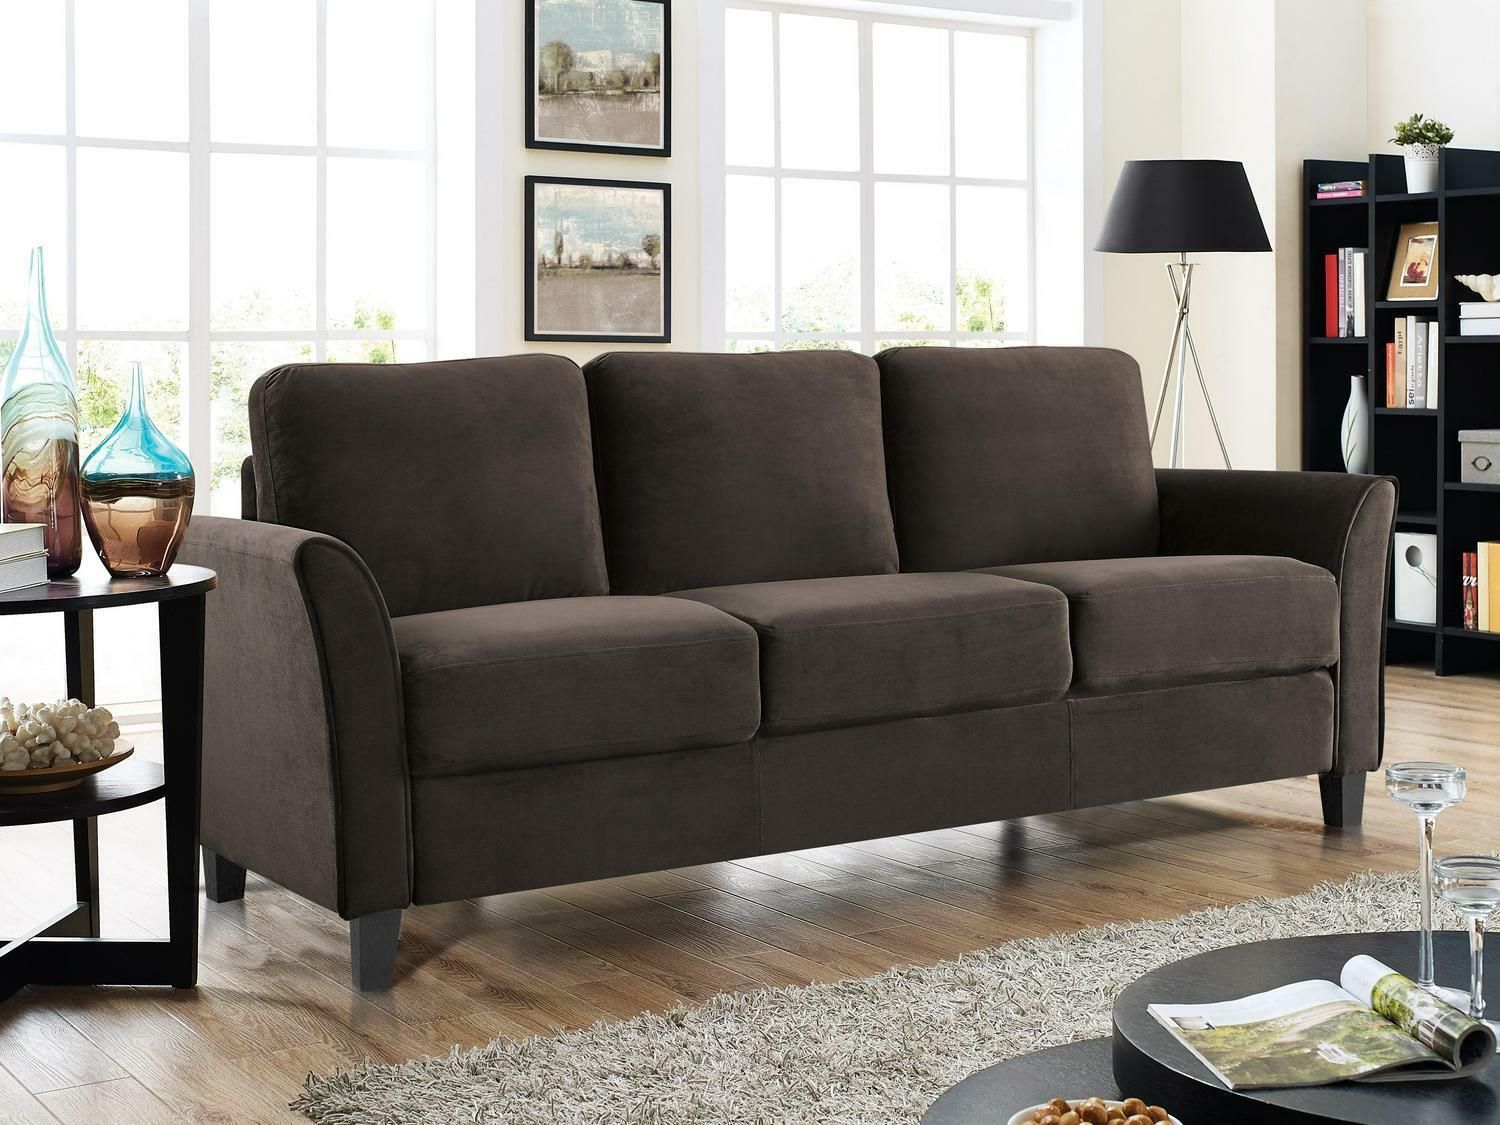 New Modern Alexa 3 Seat Curved Arm Microfiber Sofa Couch Living Room  Furniture | Ebay With Regard To Sofas With Curved Arms (Photo 12 of 15)